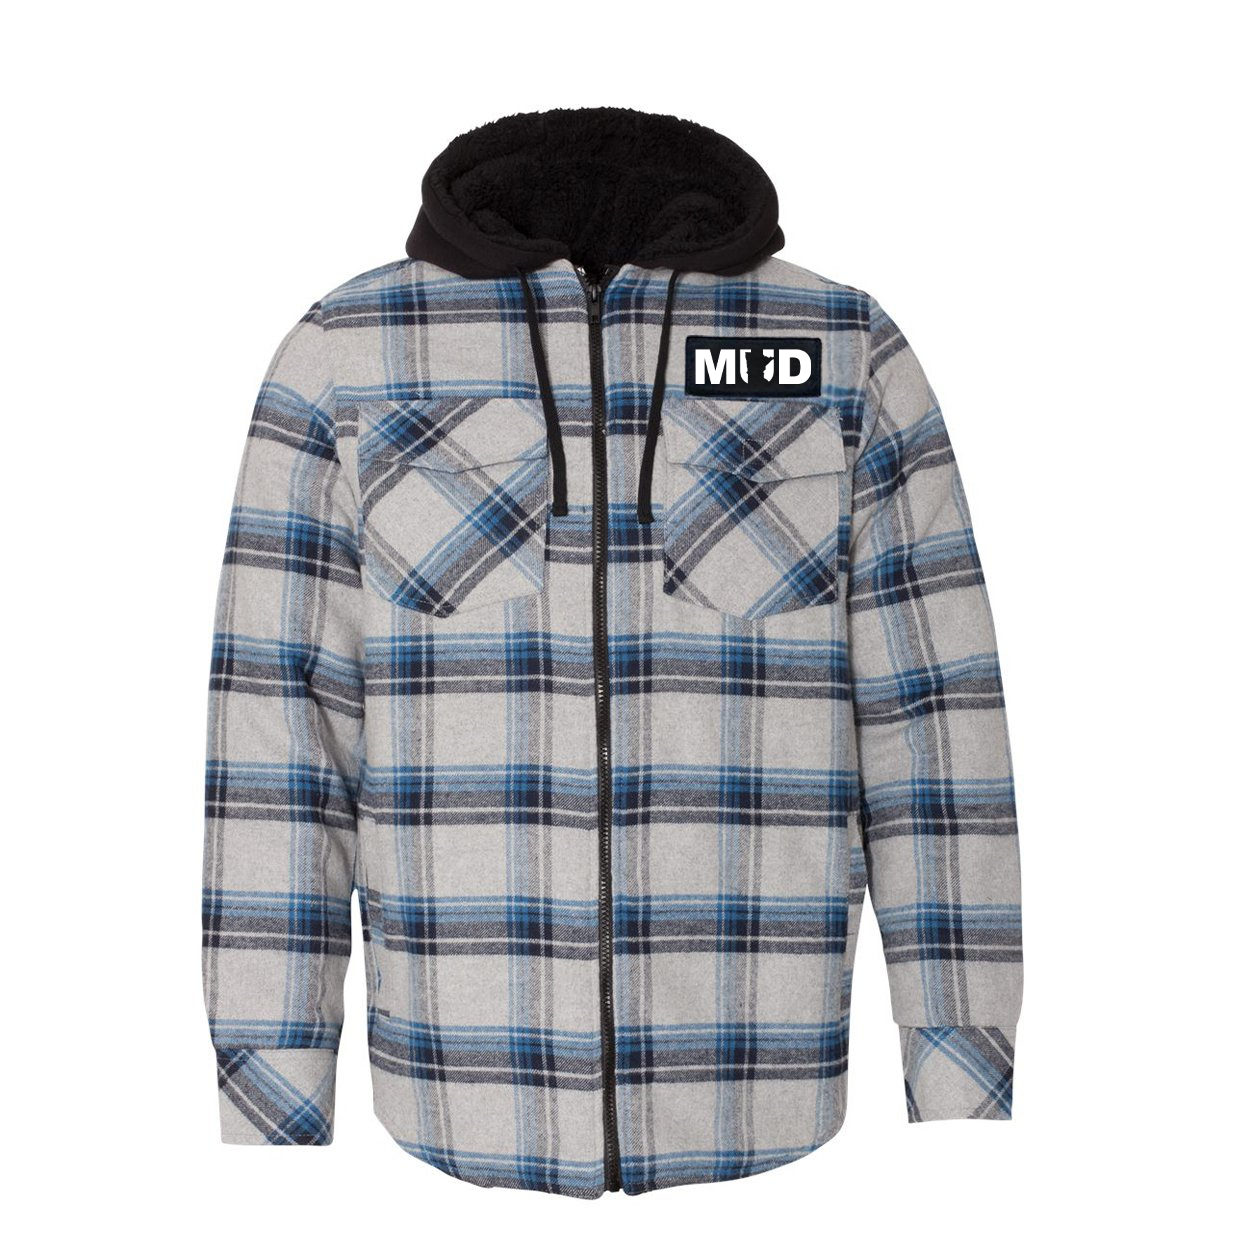 Mud Minnesota Classic Unisex Full Zip Woven Patch Hooded Flannel Jacket Gray/ Blue (White Logo)